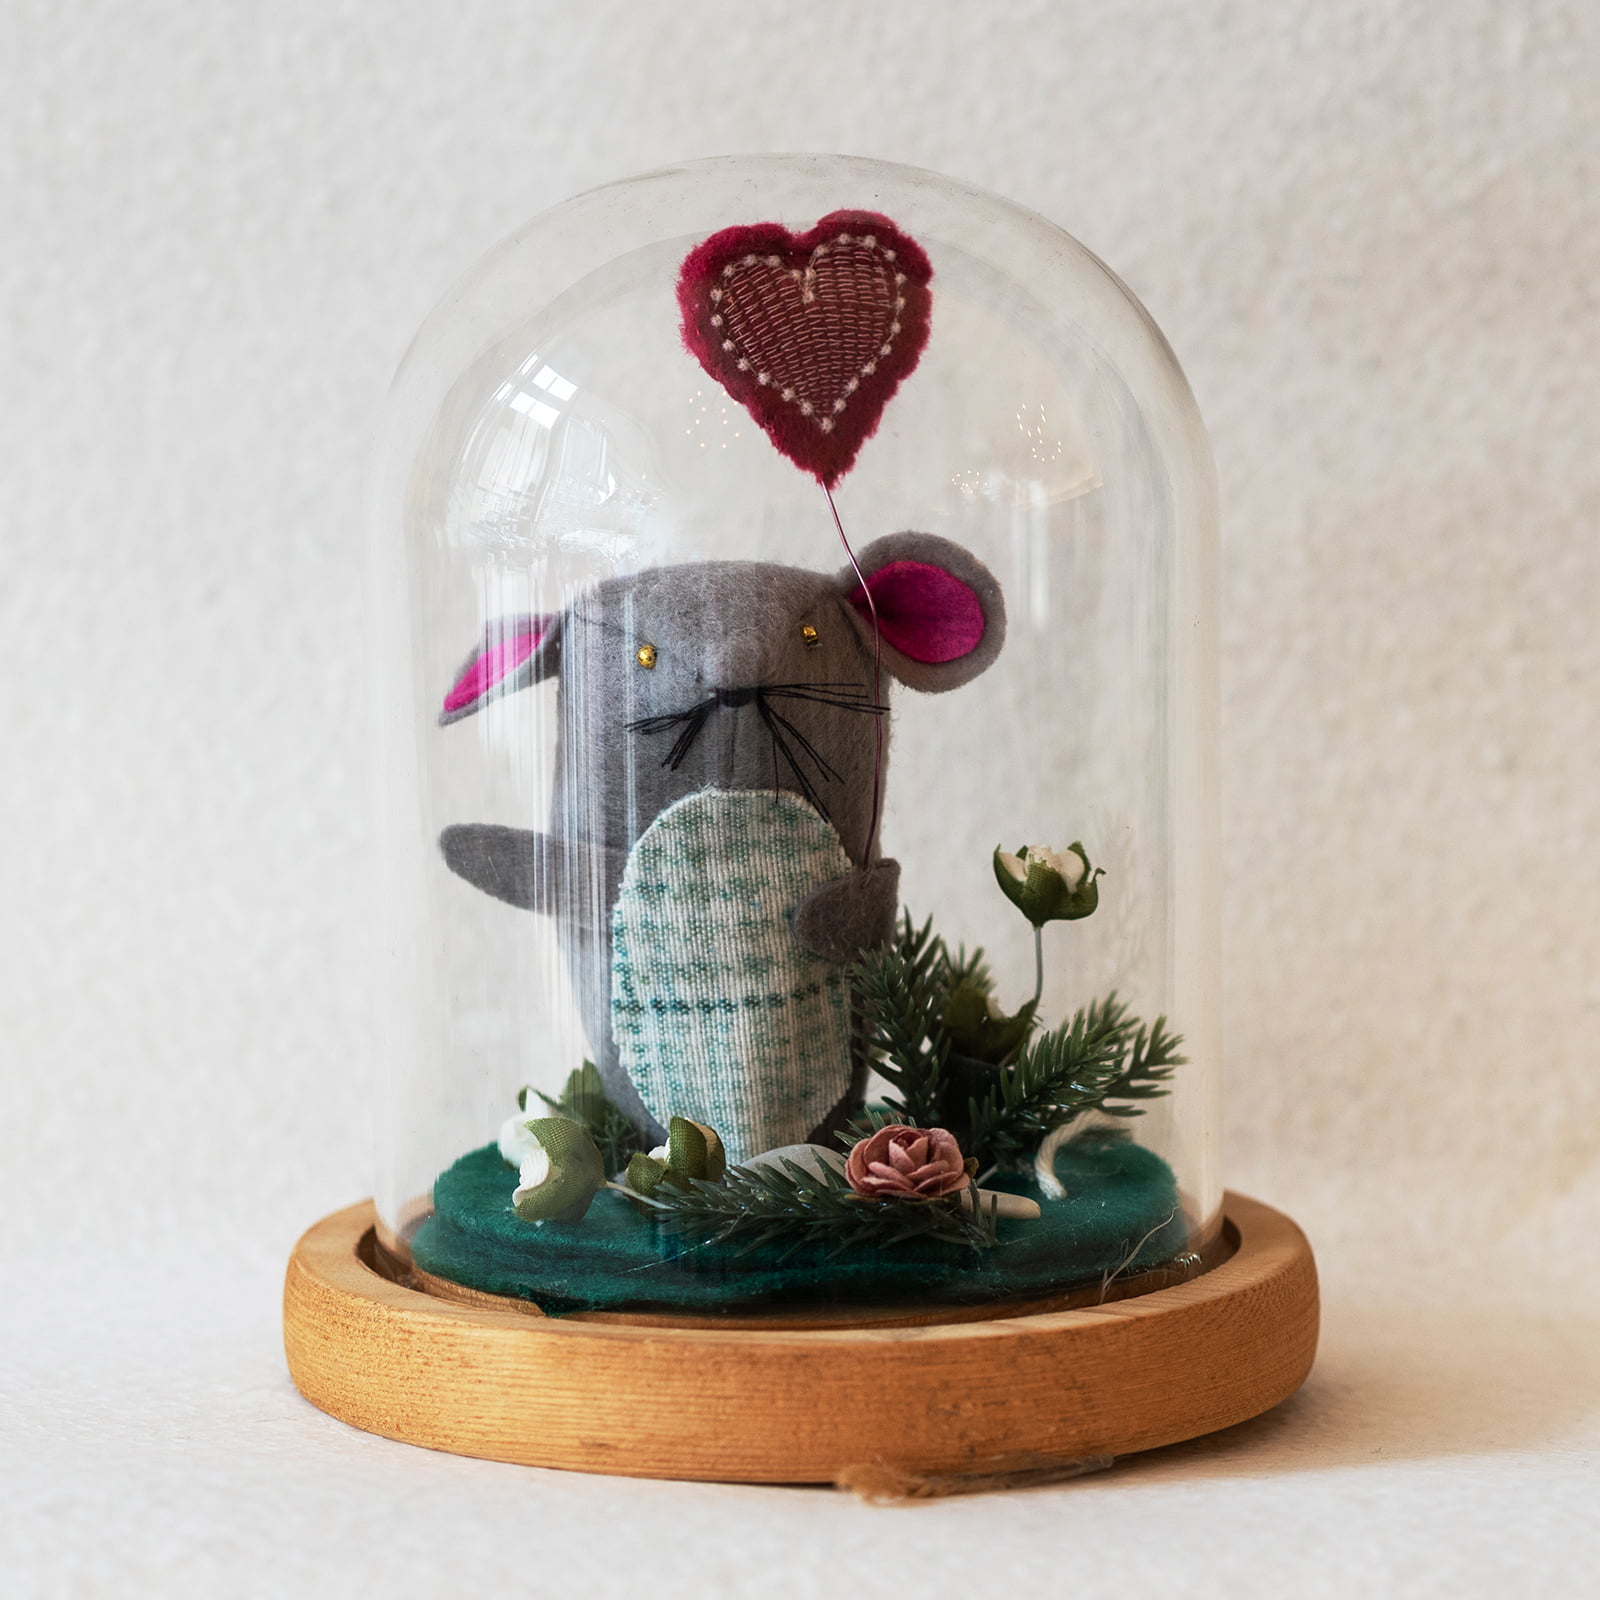 Hand made mouse in glass dome